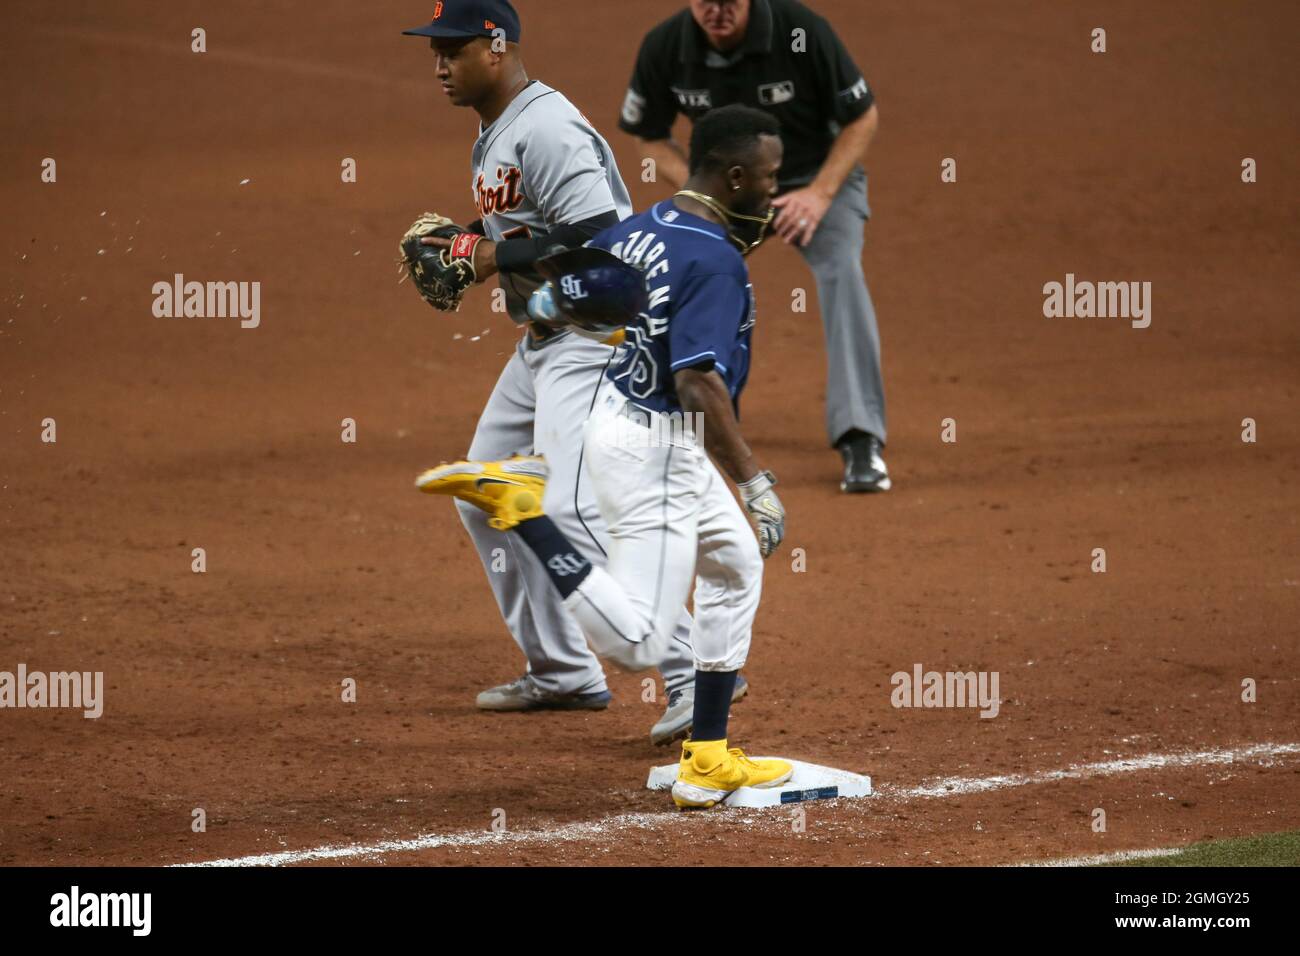 St. Petersburg, FL. USA;  Tampa Bay Rays left fielder Randy Arozarena (56) is thrown out at first in the bottom of the eighth inning during a major le Stock Photo